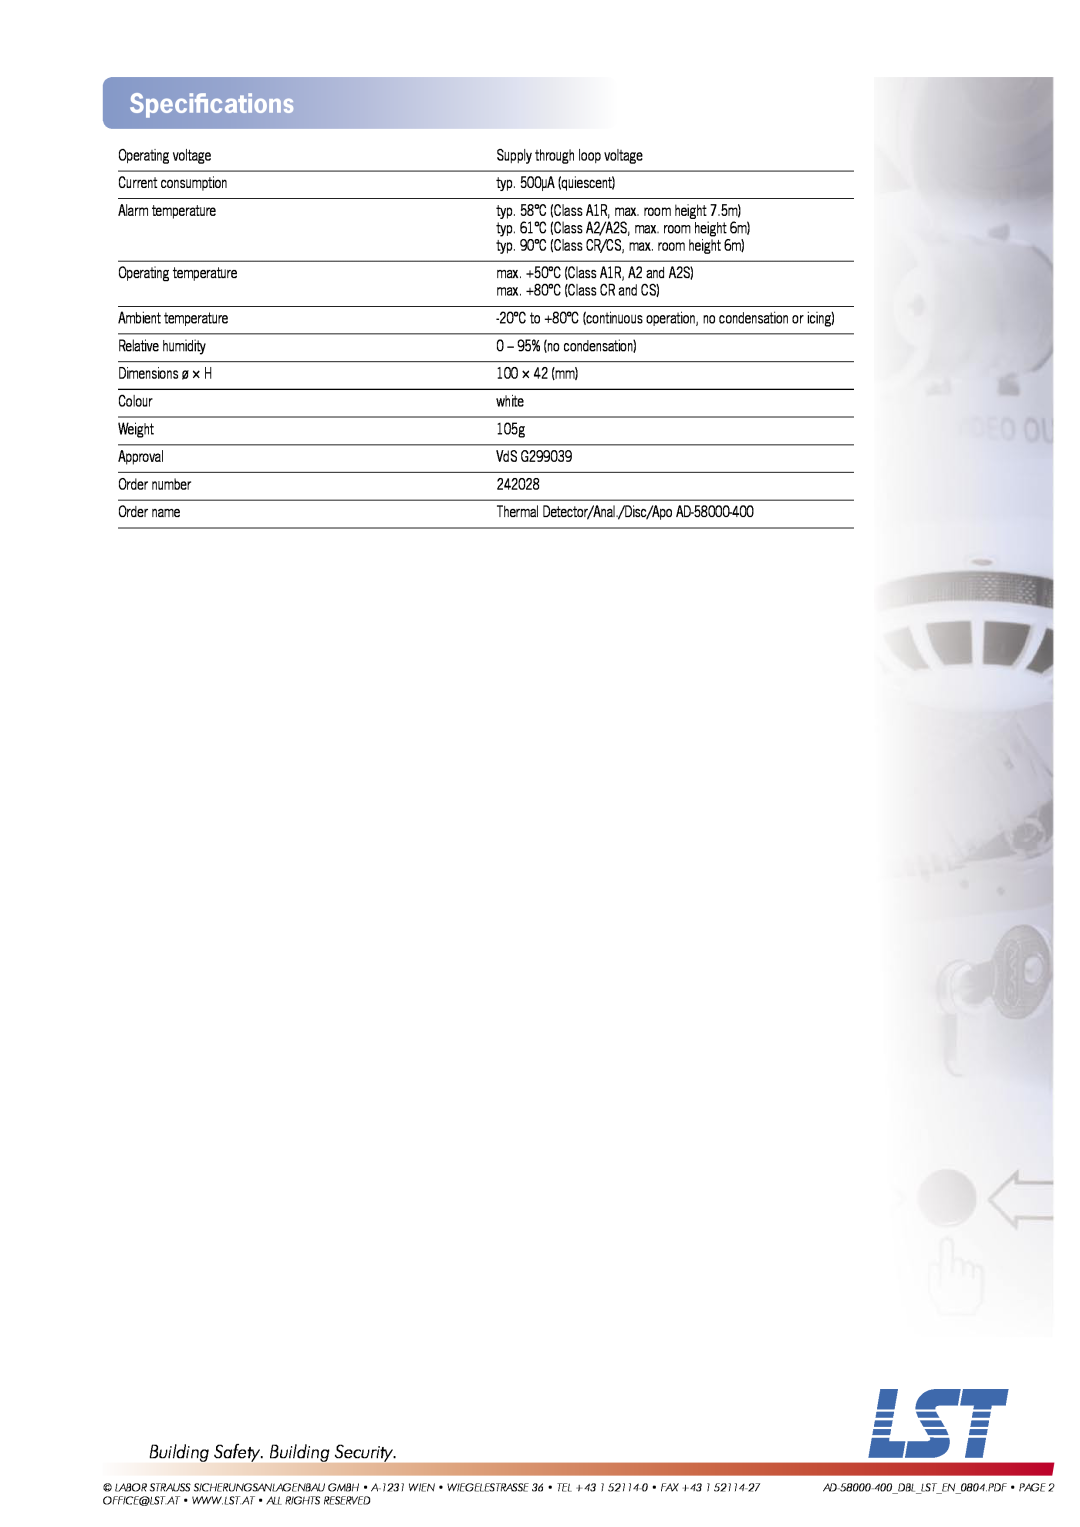 LST AD-58000-400 manual Speciﬁcations, Building Safety. Building Security 